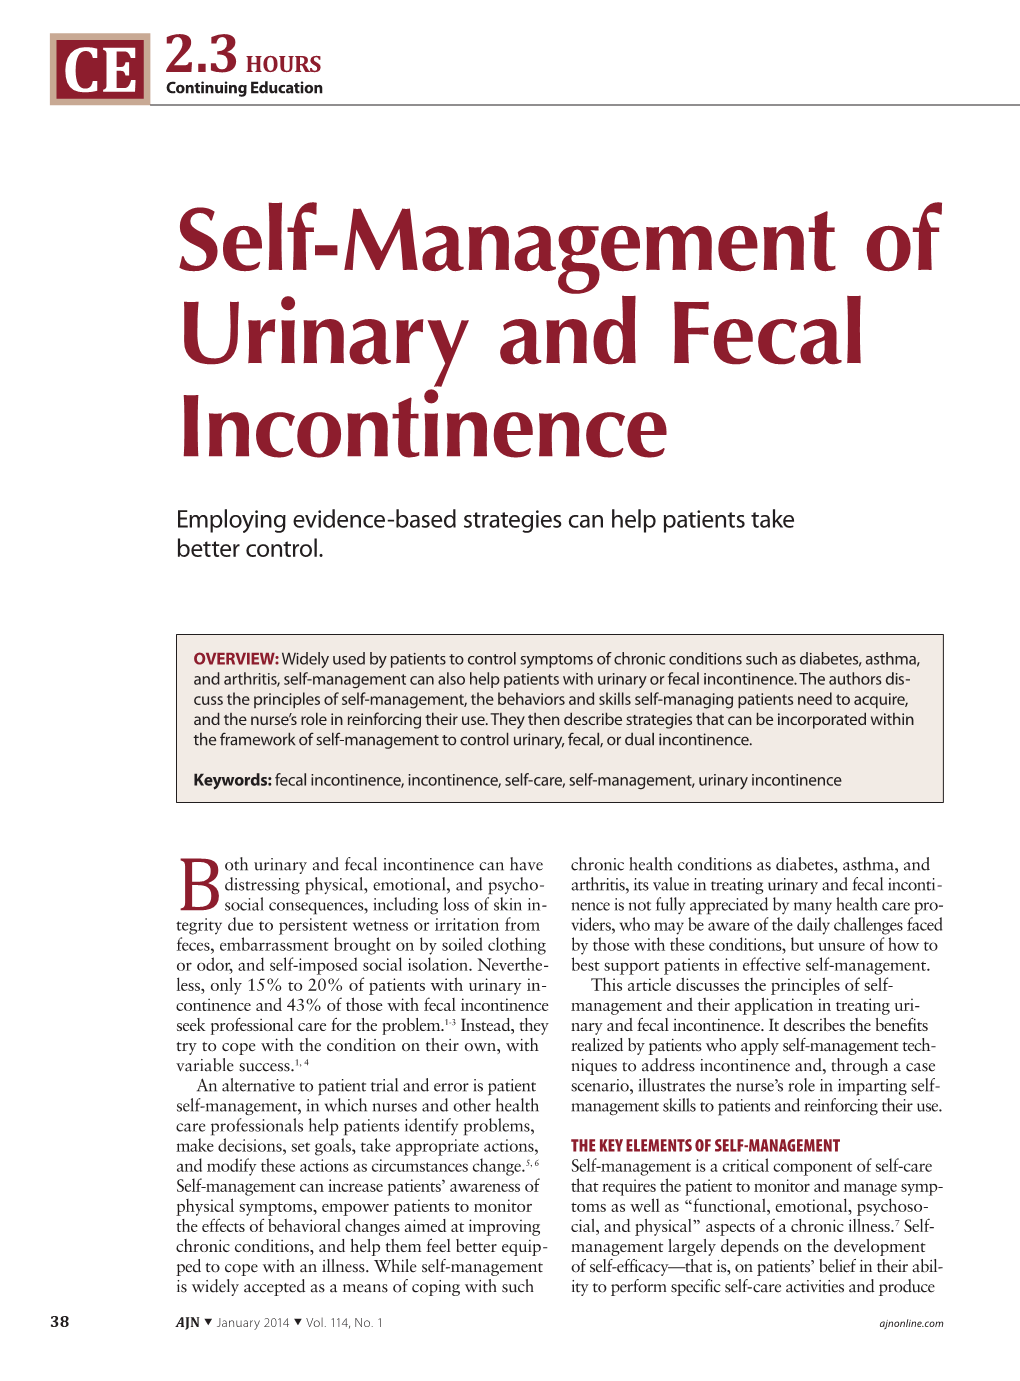 Self-Management of Urinary and Fecal Incontinence